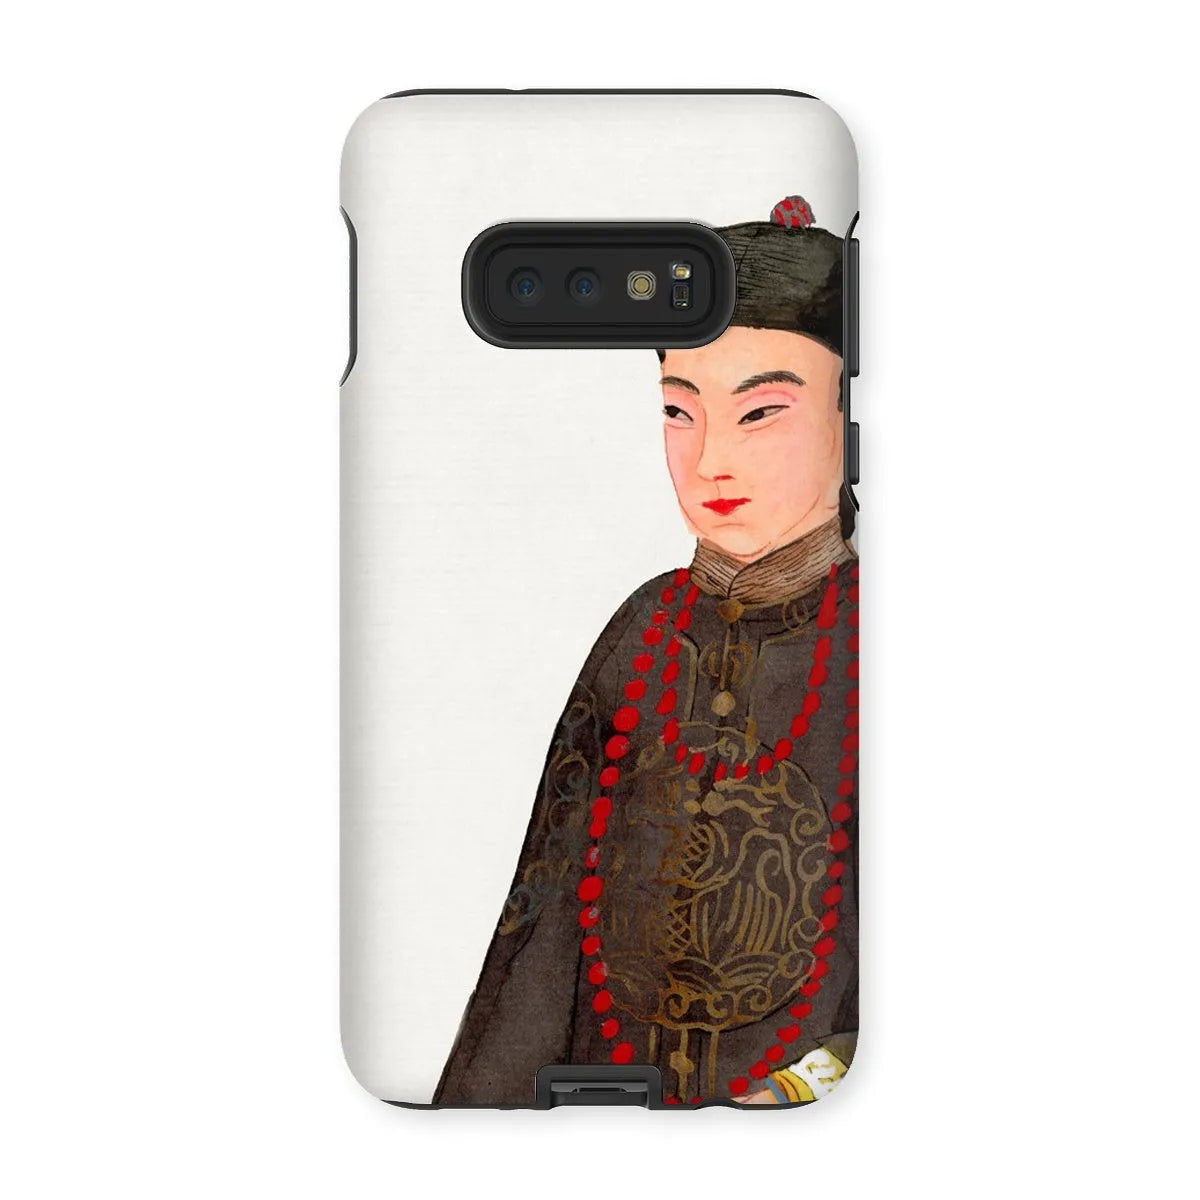 Emperor’s Courtier - Chinese Manchu Aesthetic Art Phone Case - Samsung Galaxy S10e / Matte - Mobile Phone Cases